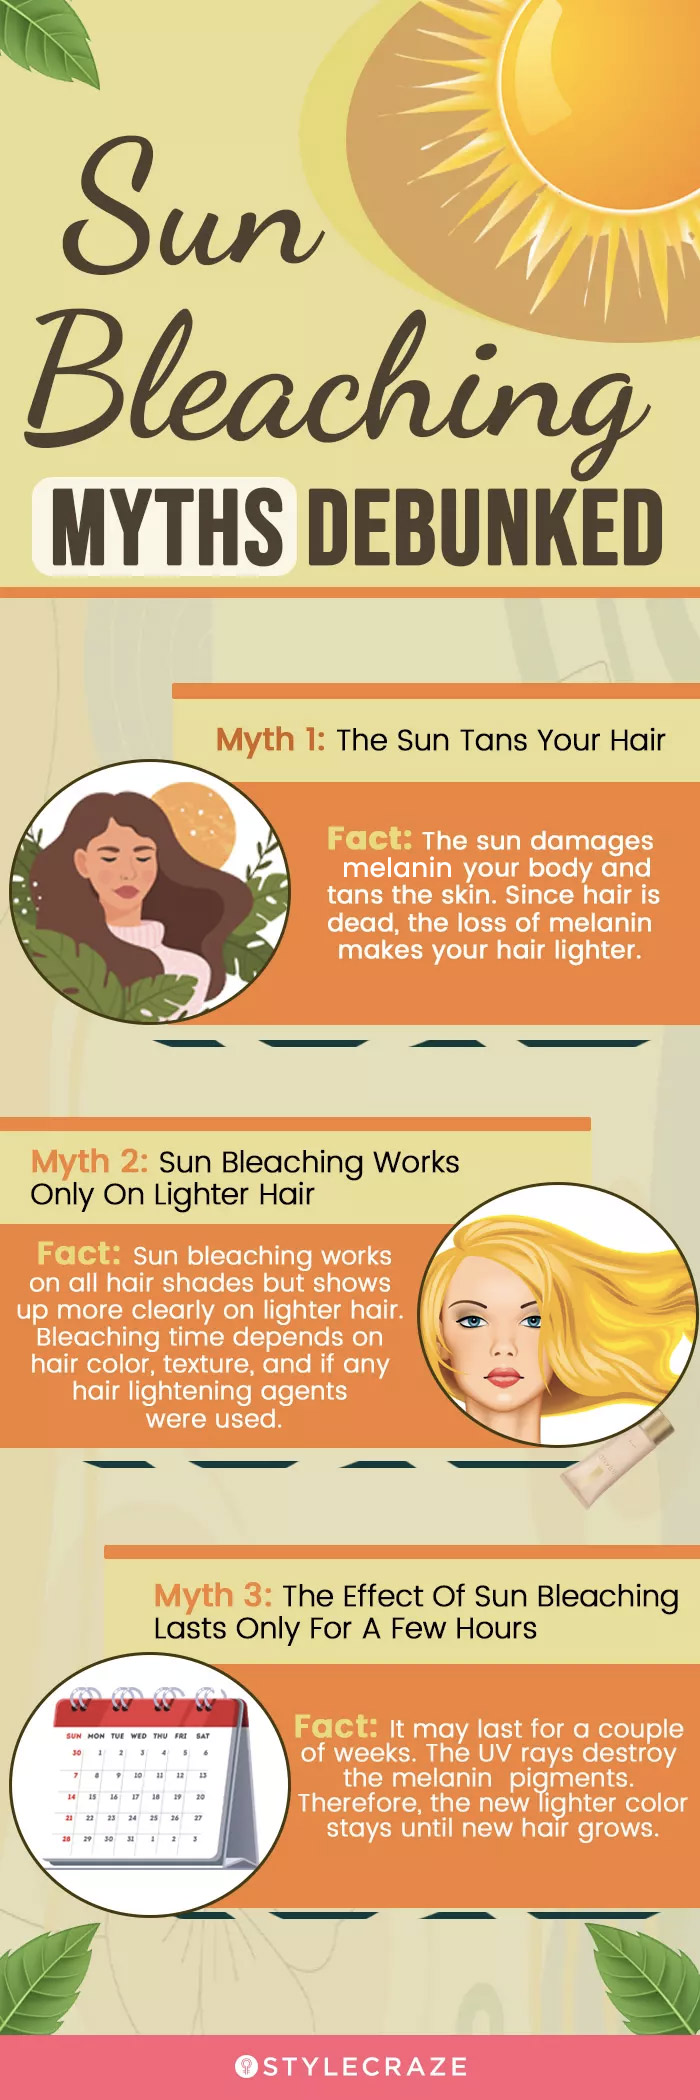 Sun Bleaching Myths Debunked (infographic)